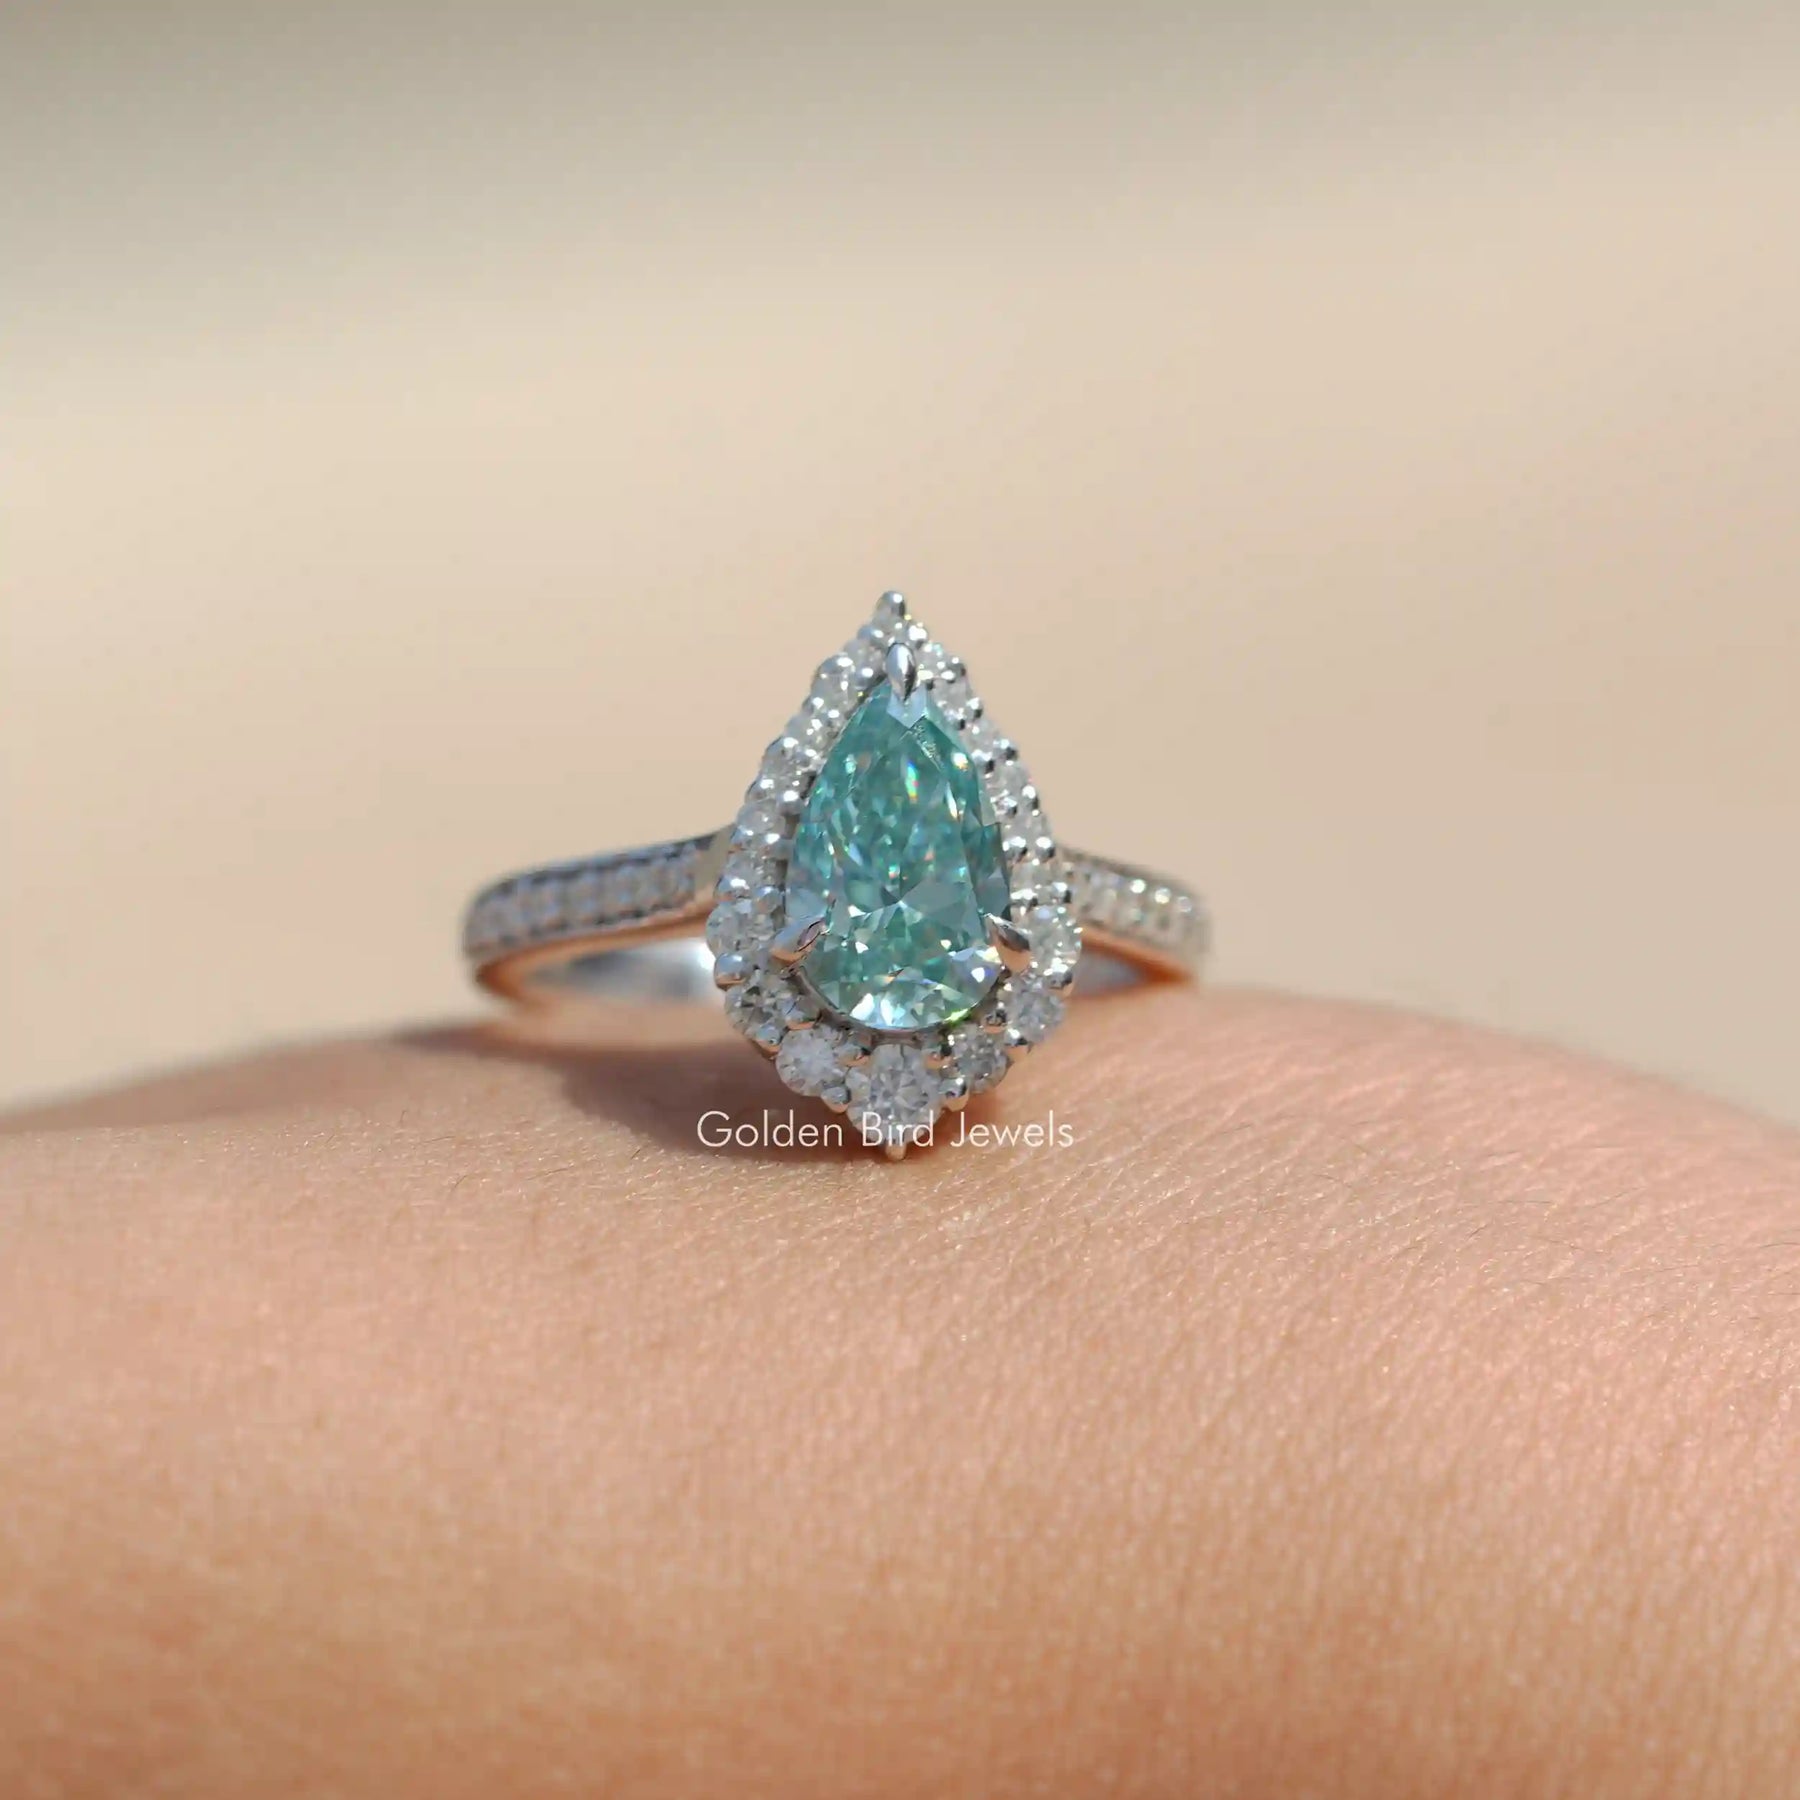 [Pear Cut Moissanite Engagement Ring Made In 18k White Gold]-[Golden Bird Jewels]